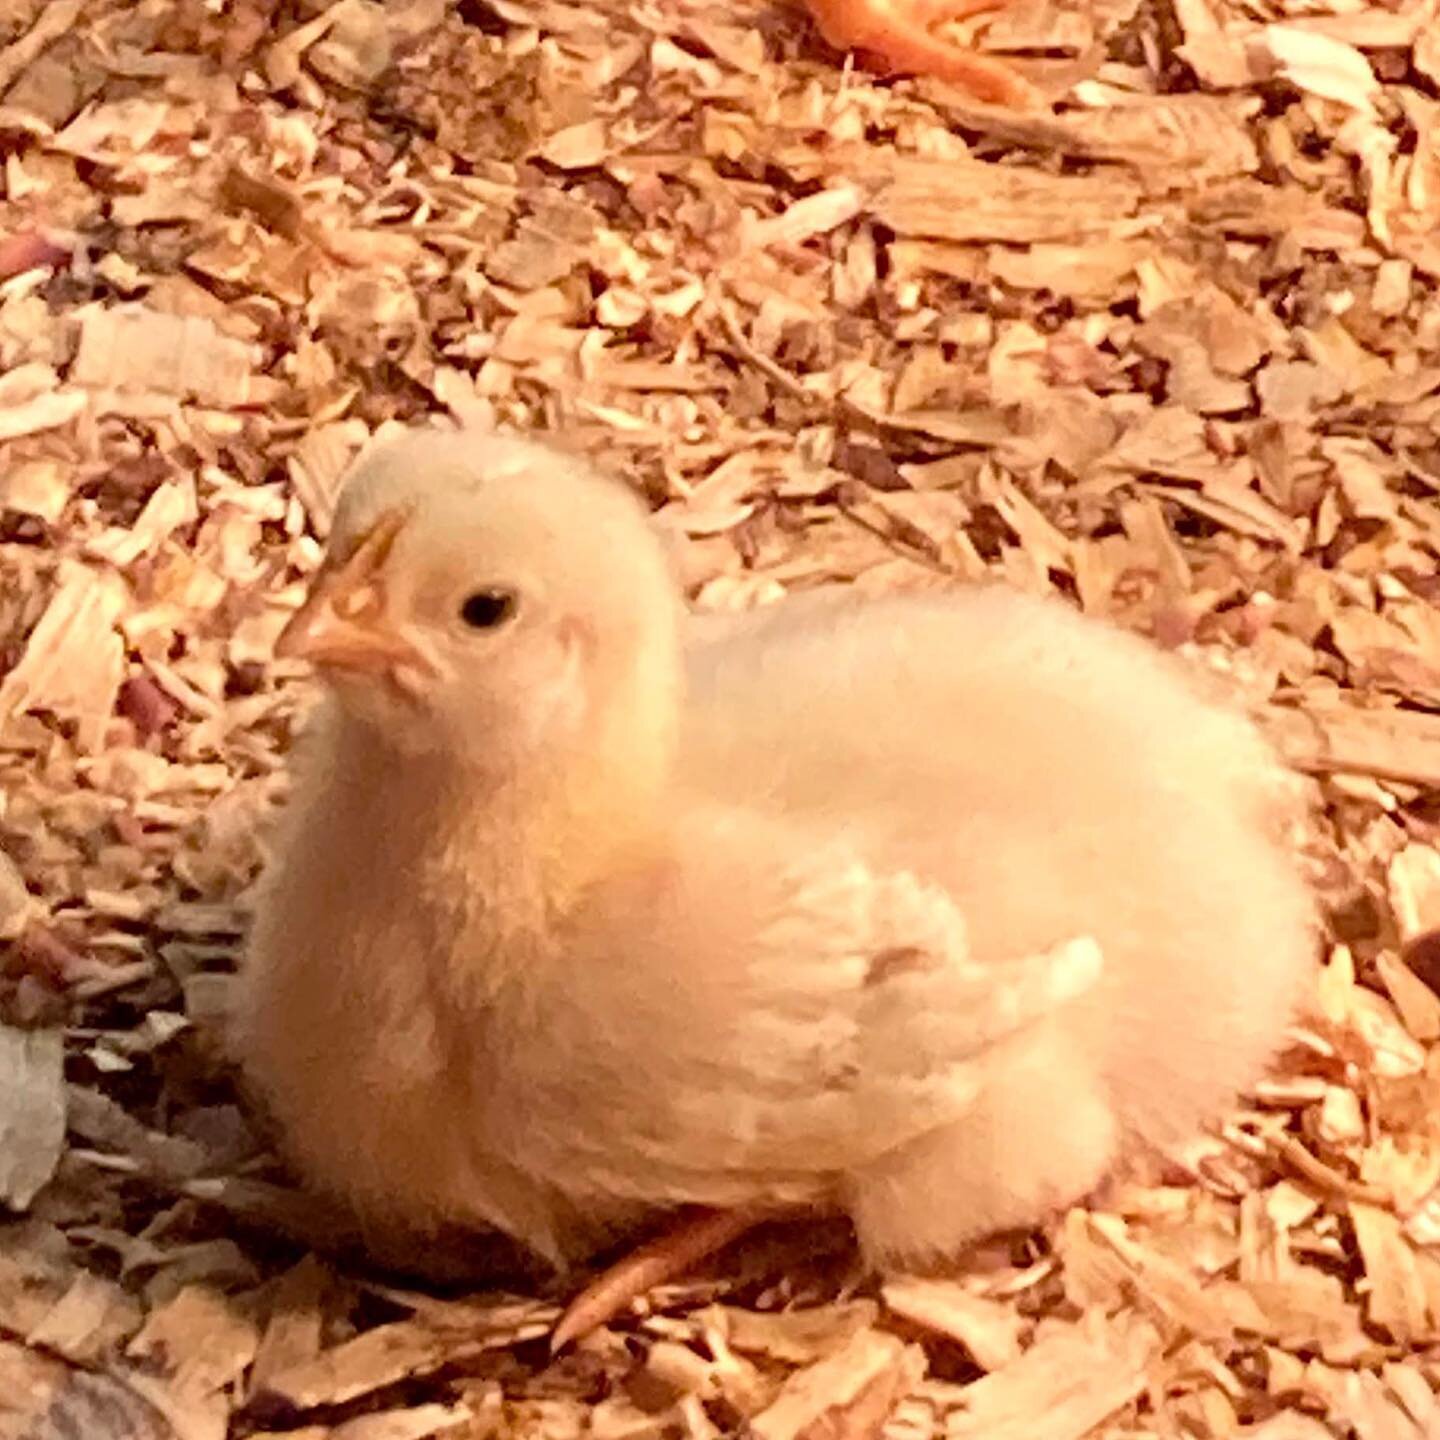 The chicks are here and growing! #2021chickenseason #knowyourfarmer #pasturedpoultry